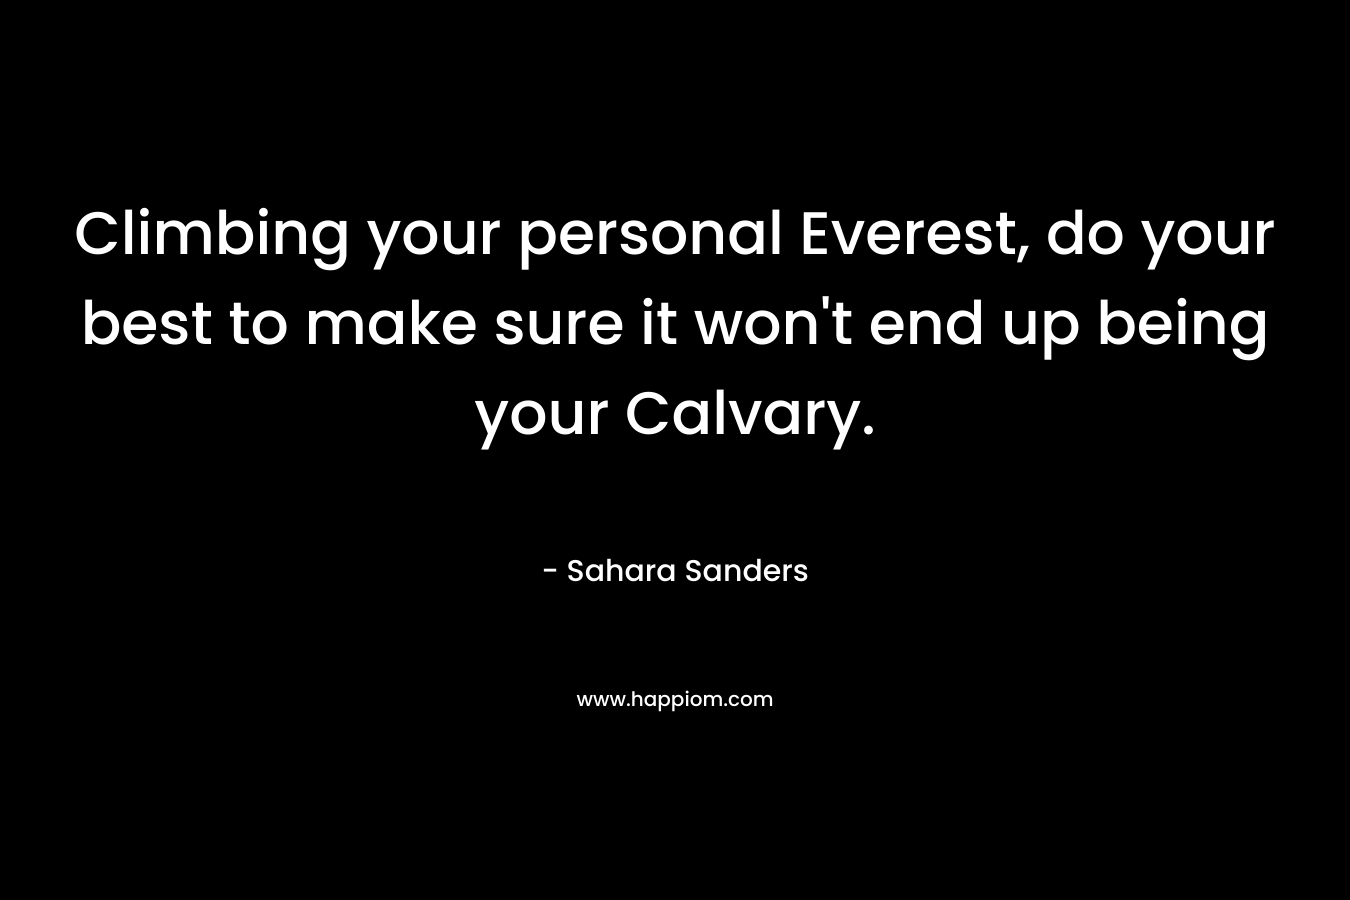 Climbing your personal Everest, do your best to make sure it won’t end up being your Calvary. – Sahara Sanders